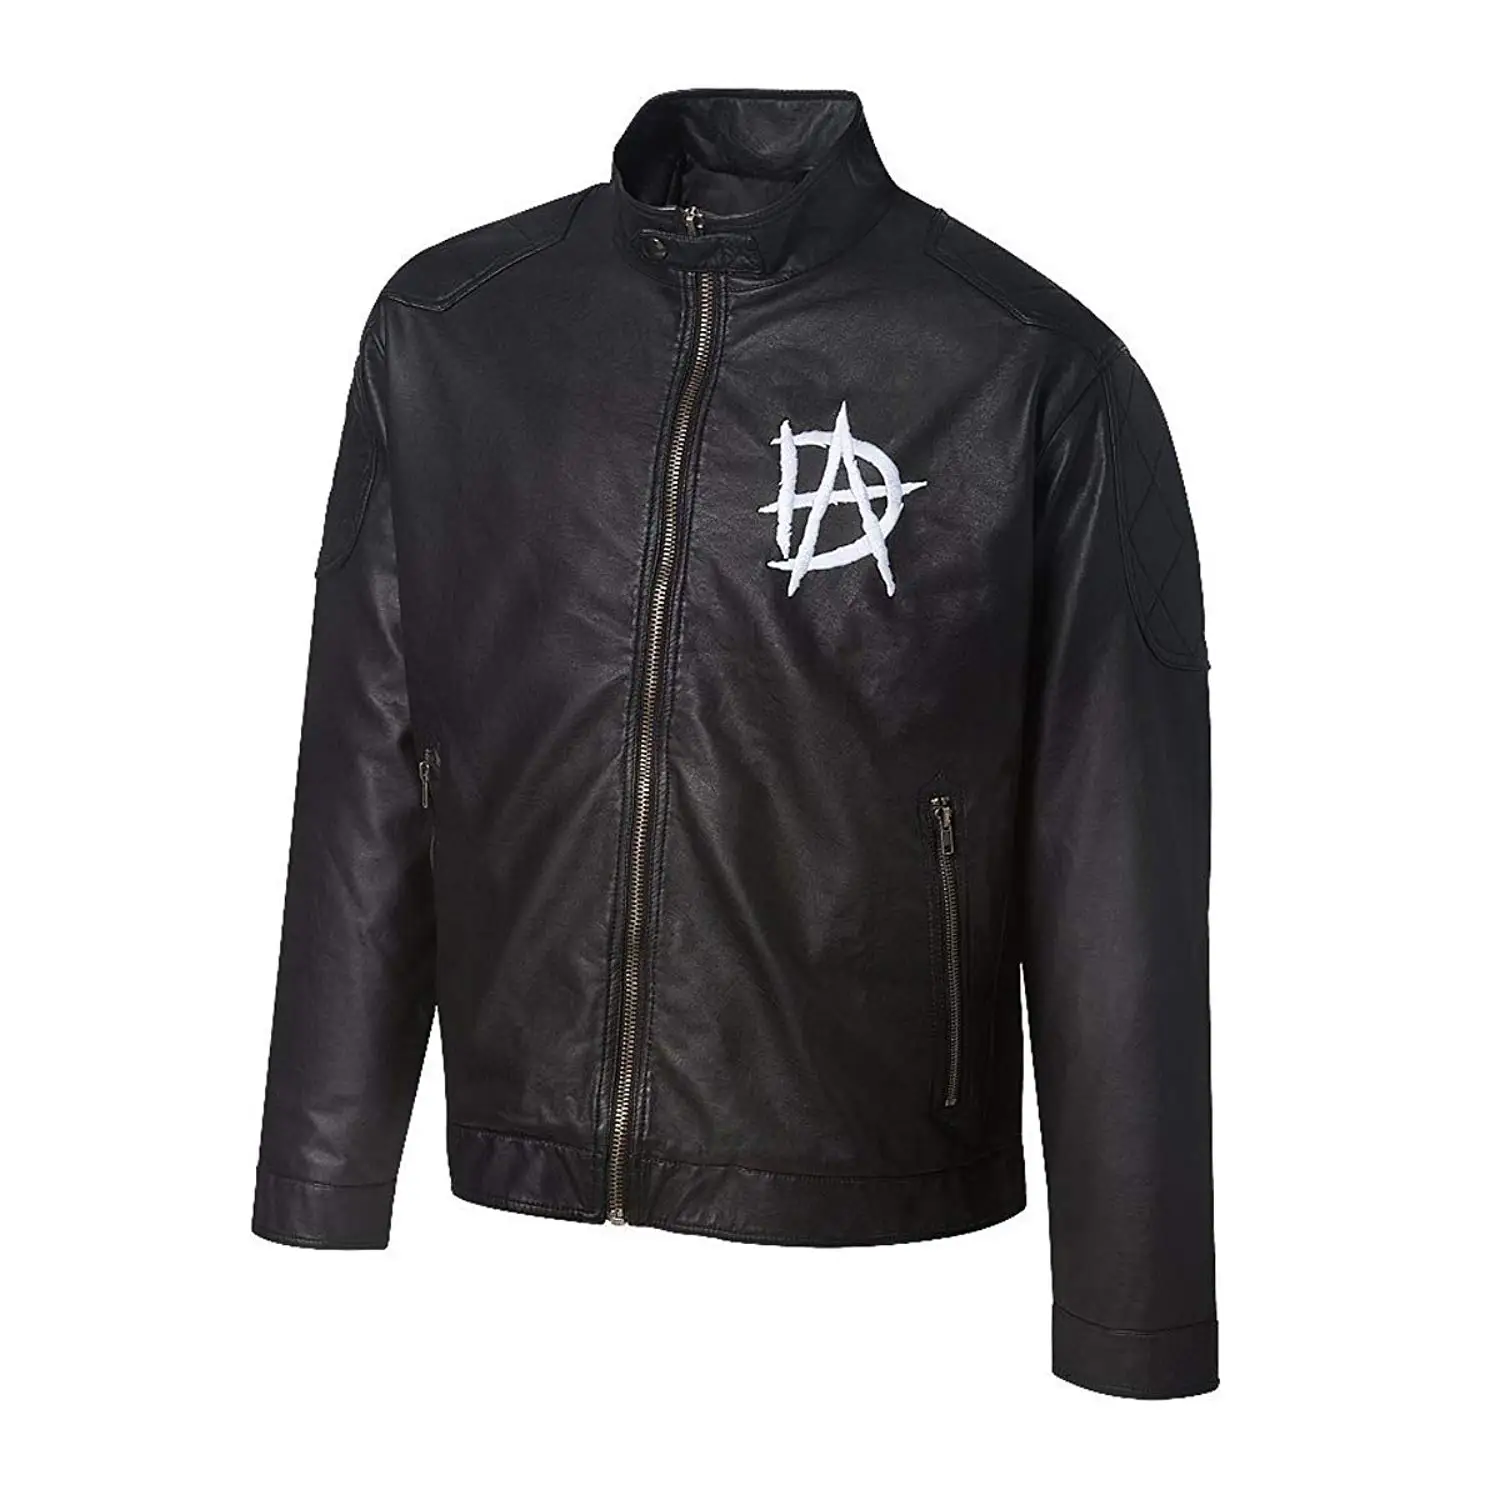 Decrum Celebrity Leather Jackets and Coats.